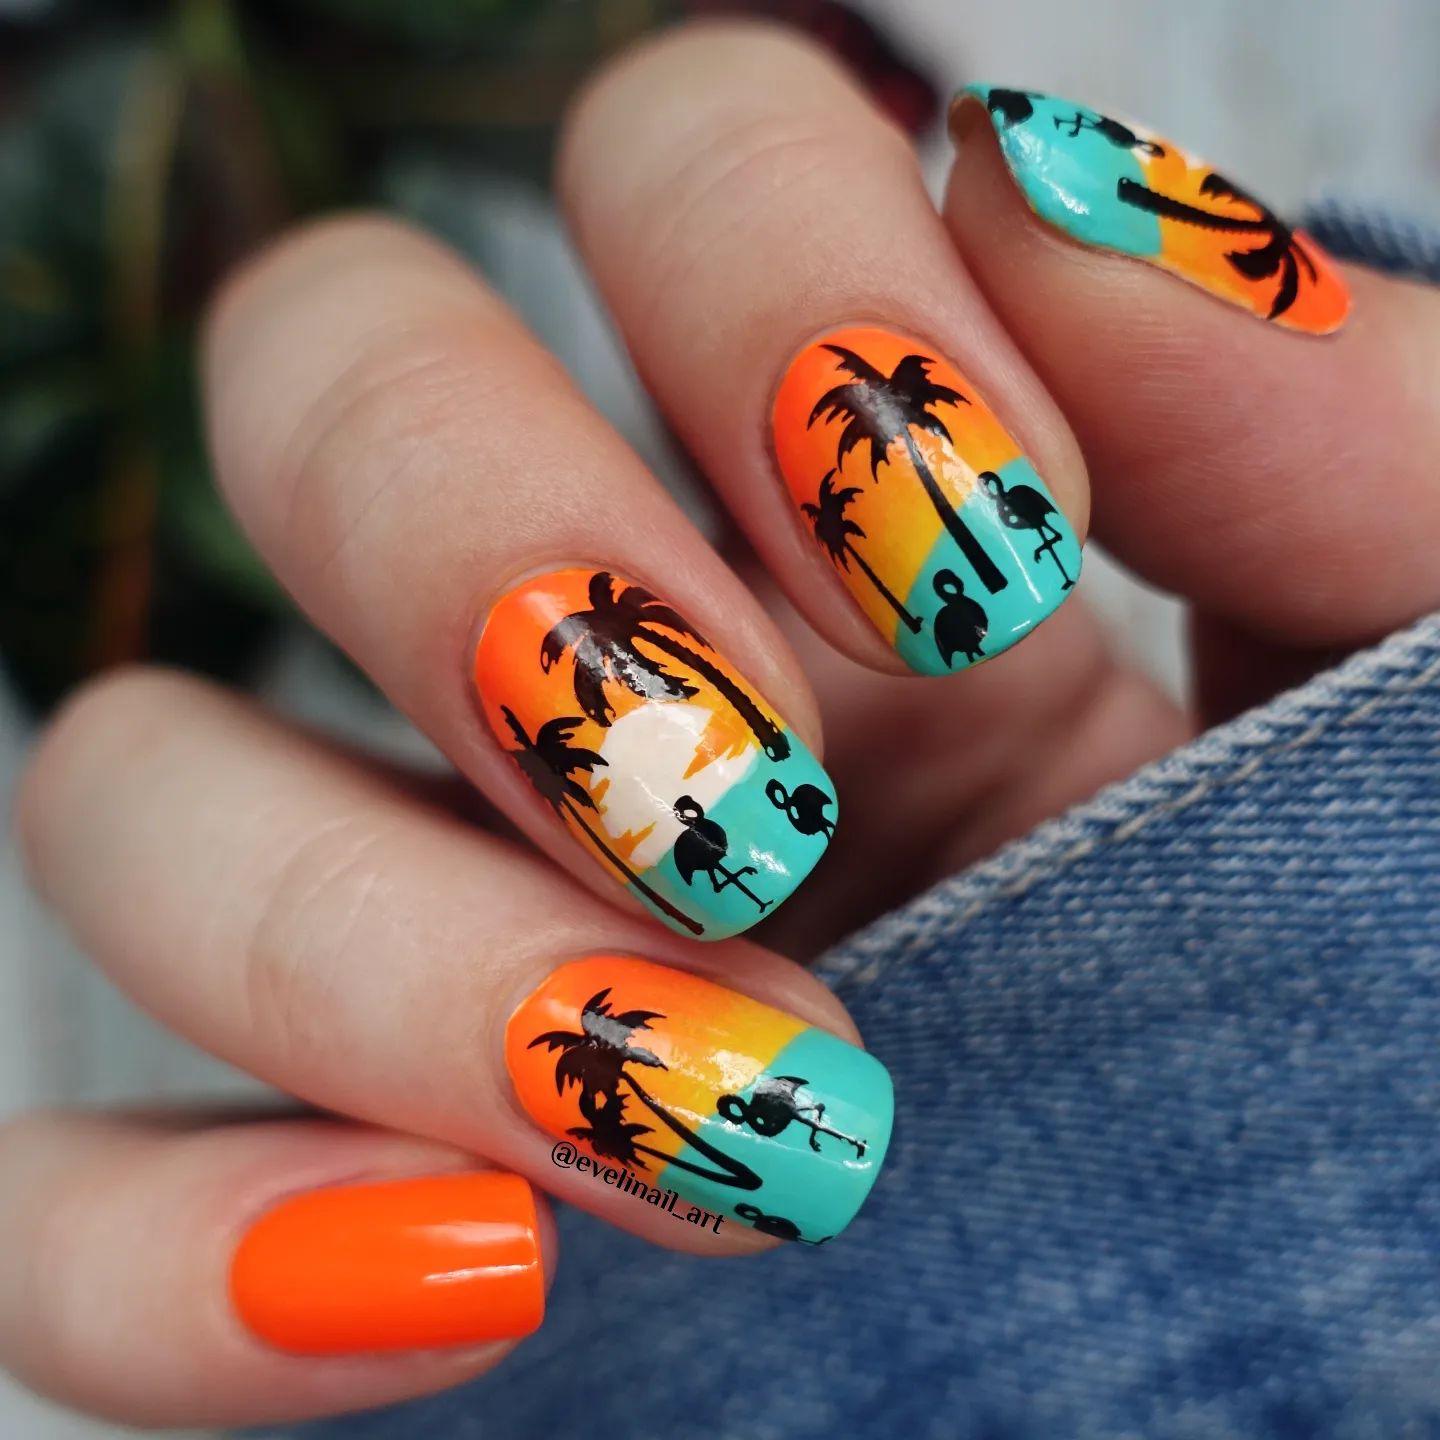 Are you a fan of Hawaiian vibes? Well, to show these vibes on your nails, you should definitely go for this orange and turquoise neon nails!